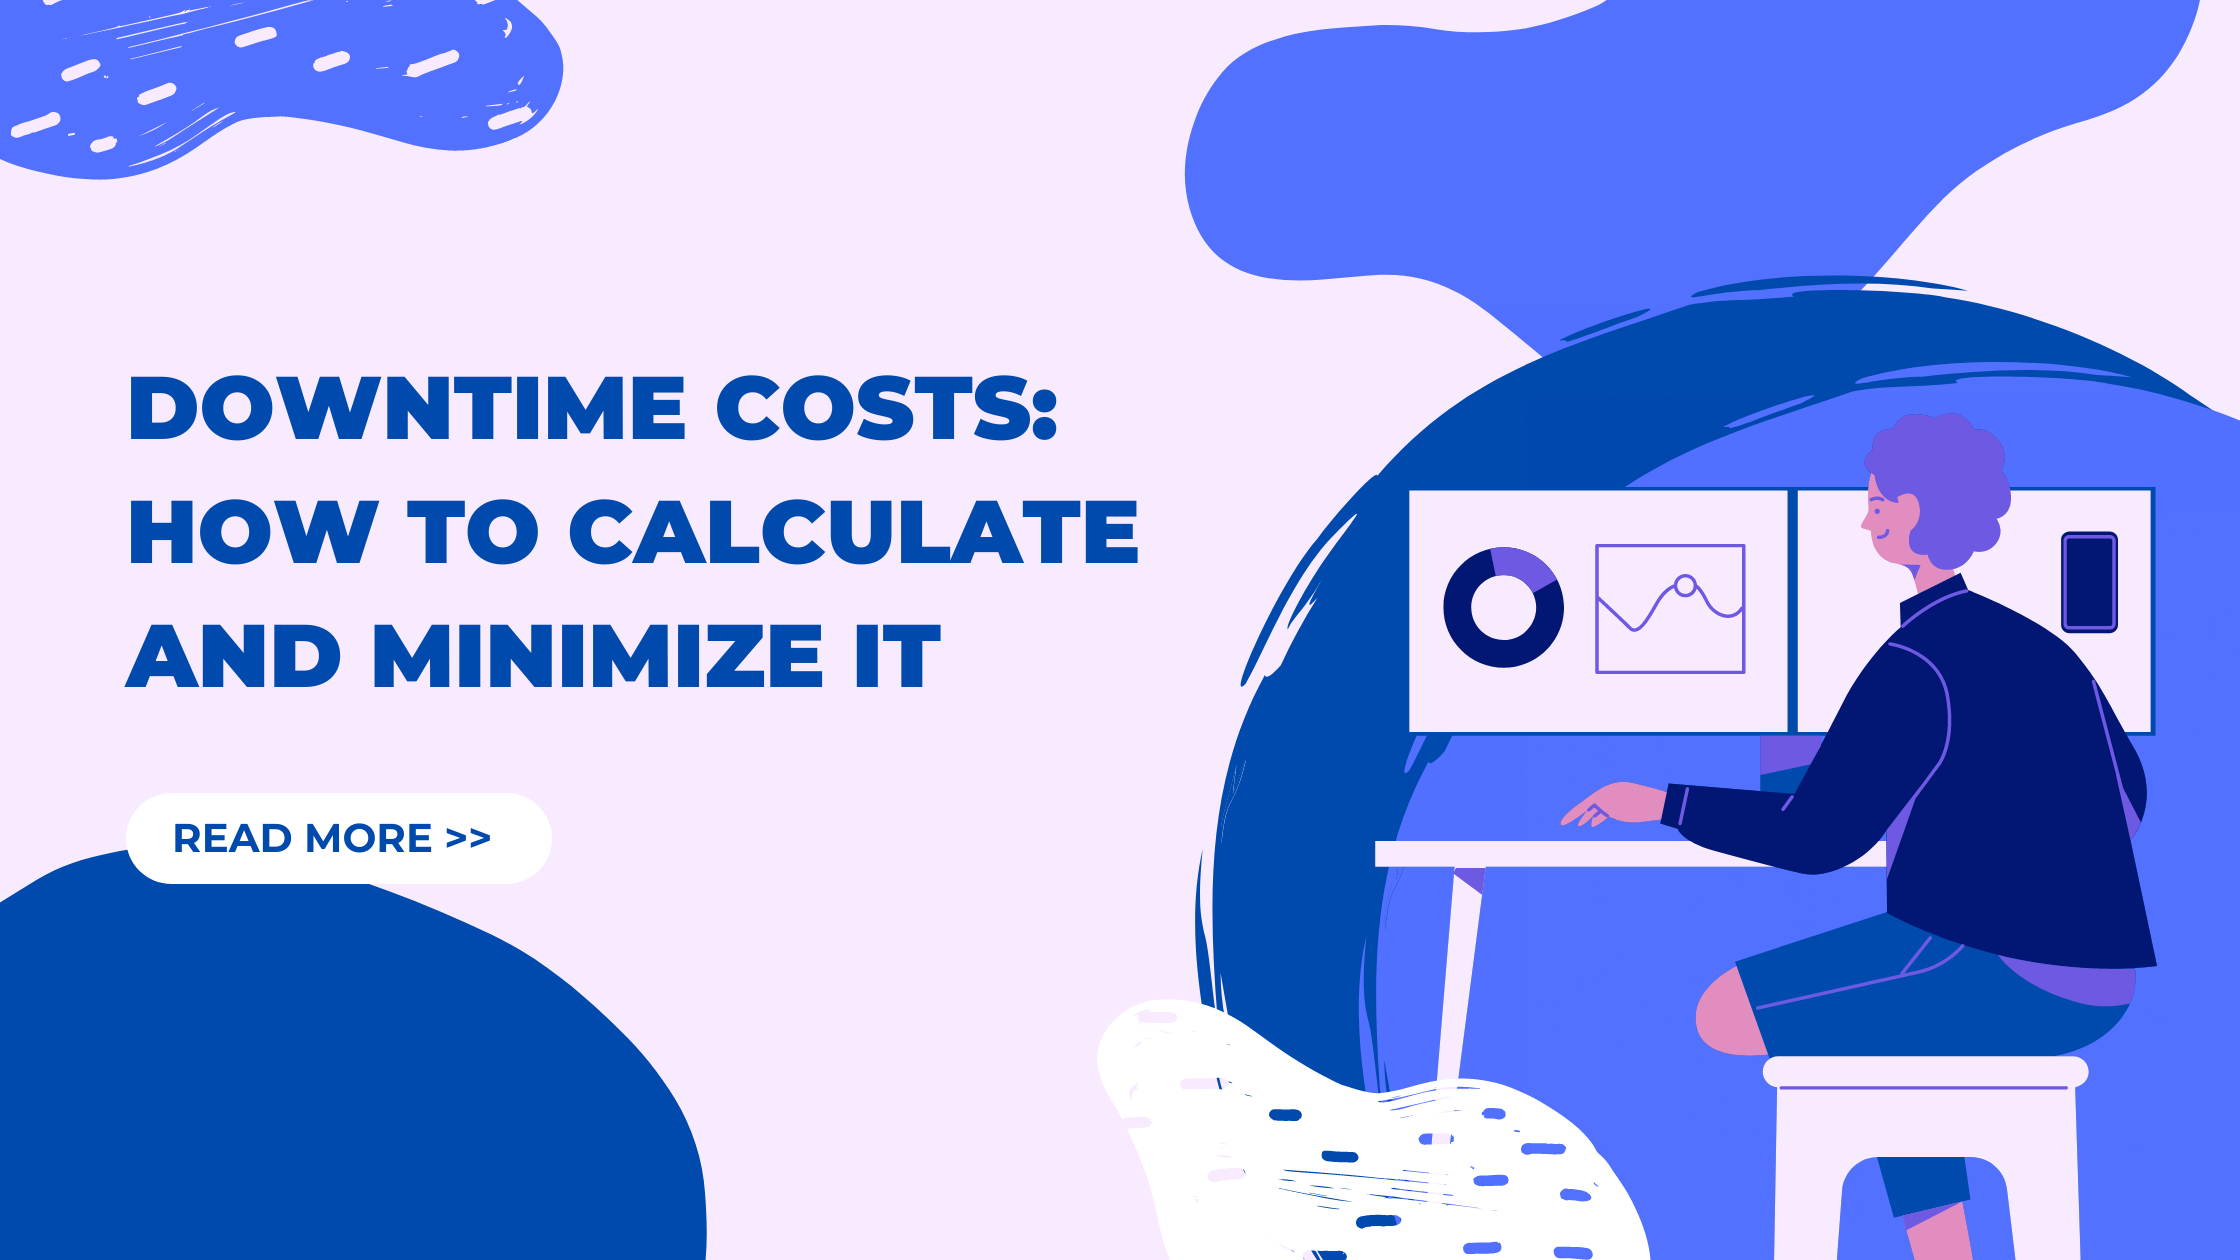 Downtime Cost: How to Calculate and Minimize it